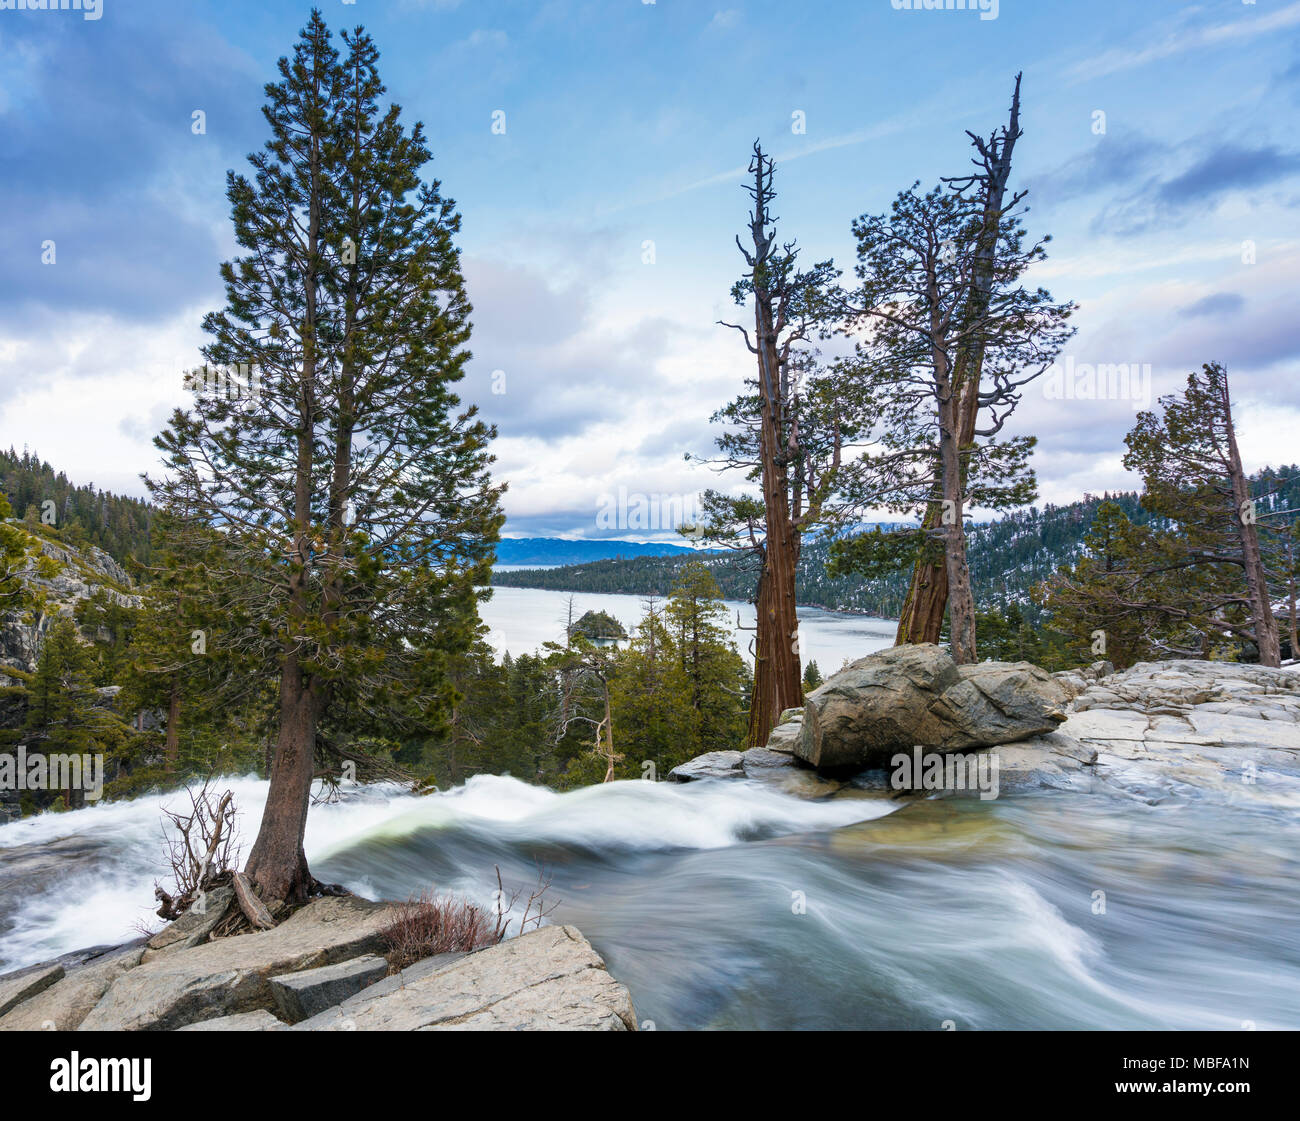 Emerald Bay on Lake Tahoe from the top of Lower Eagle Falls, Sierra Nevada, California, USA Stock Photo